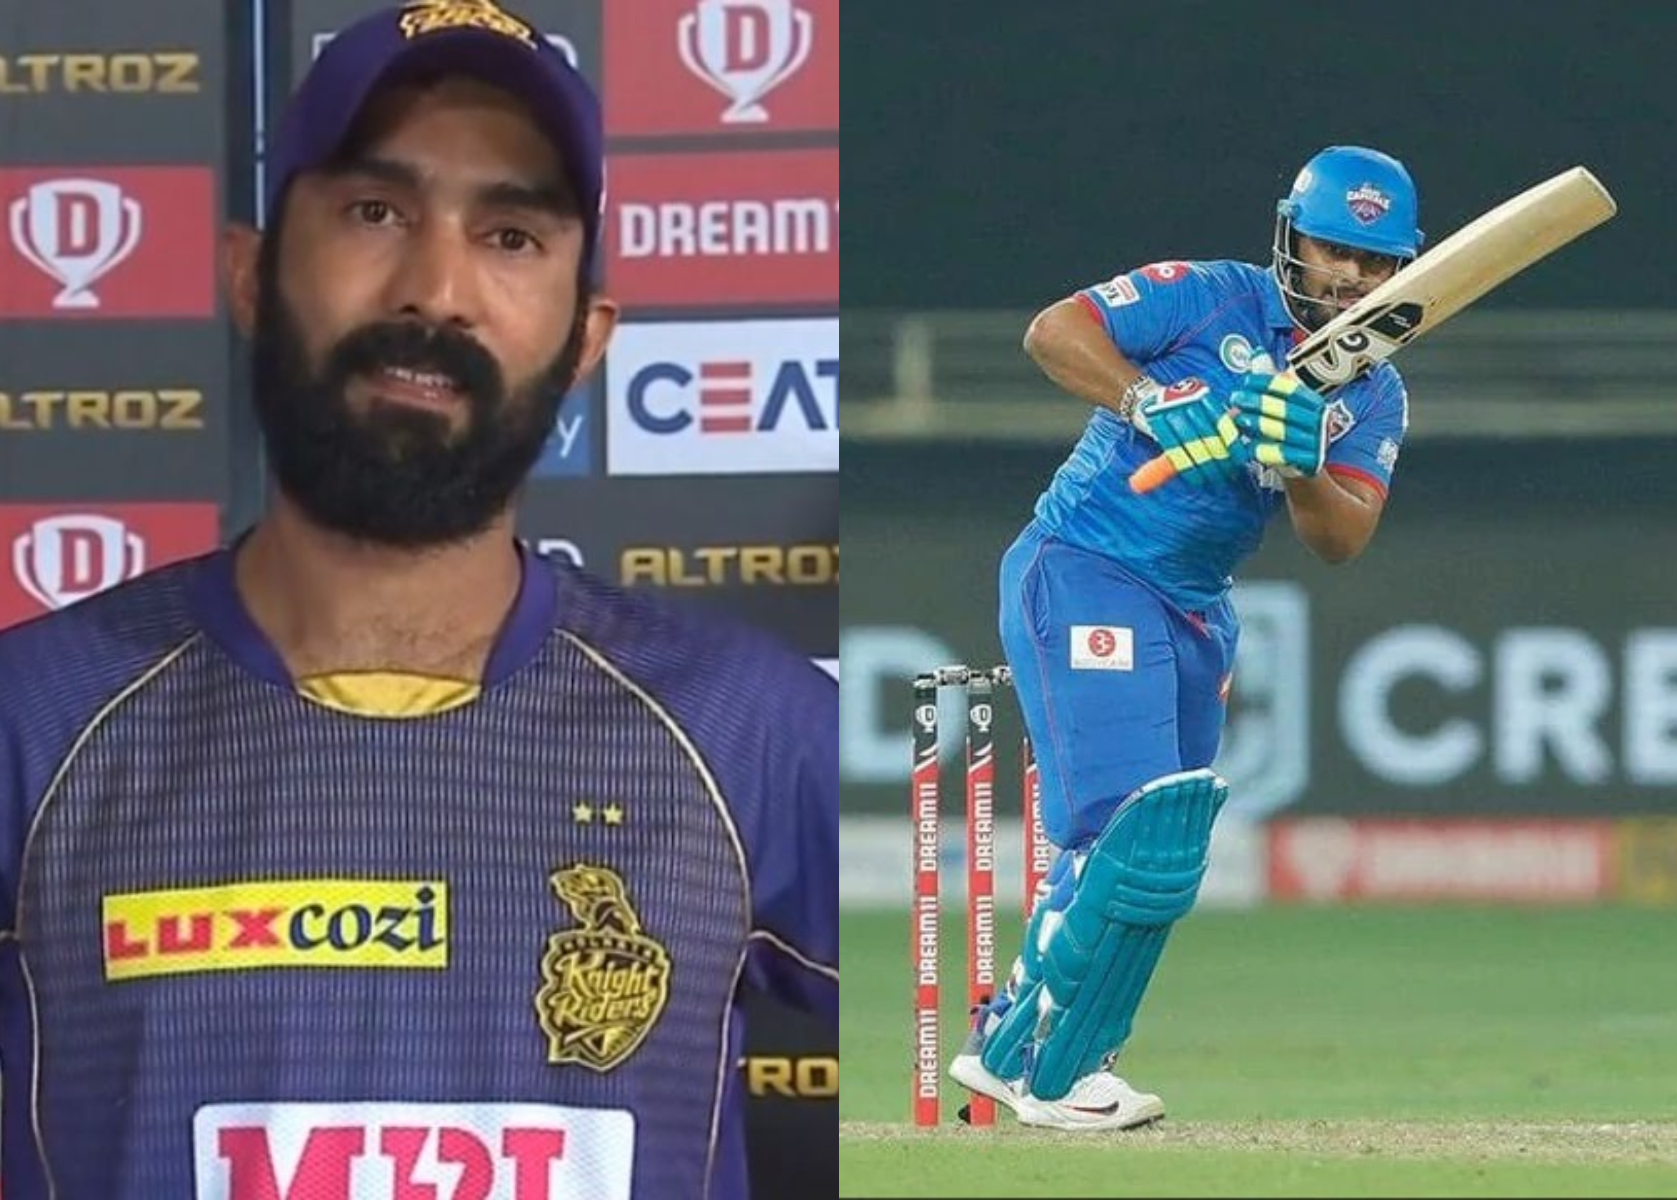 Karthik and Pant had a horror show in IPL 2020 | BCCI/IPL